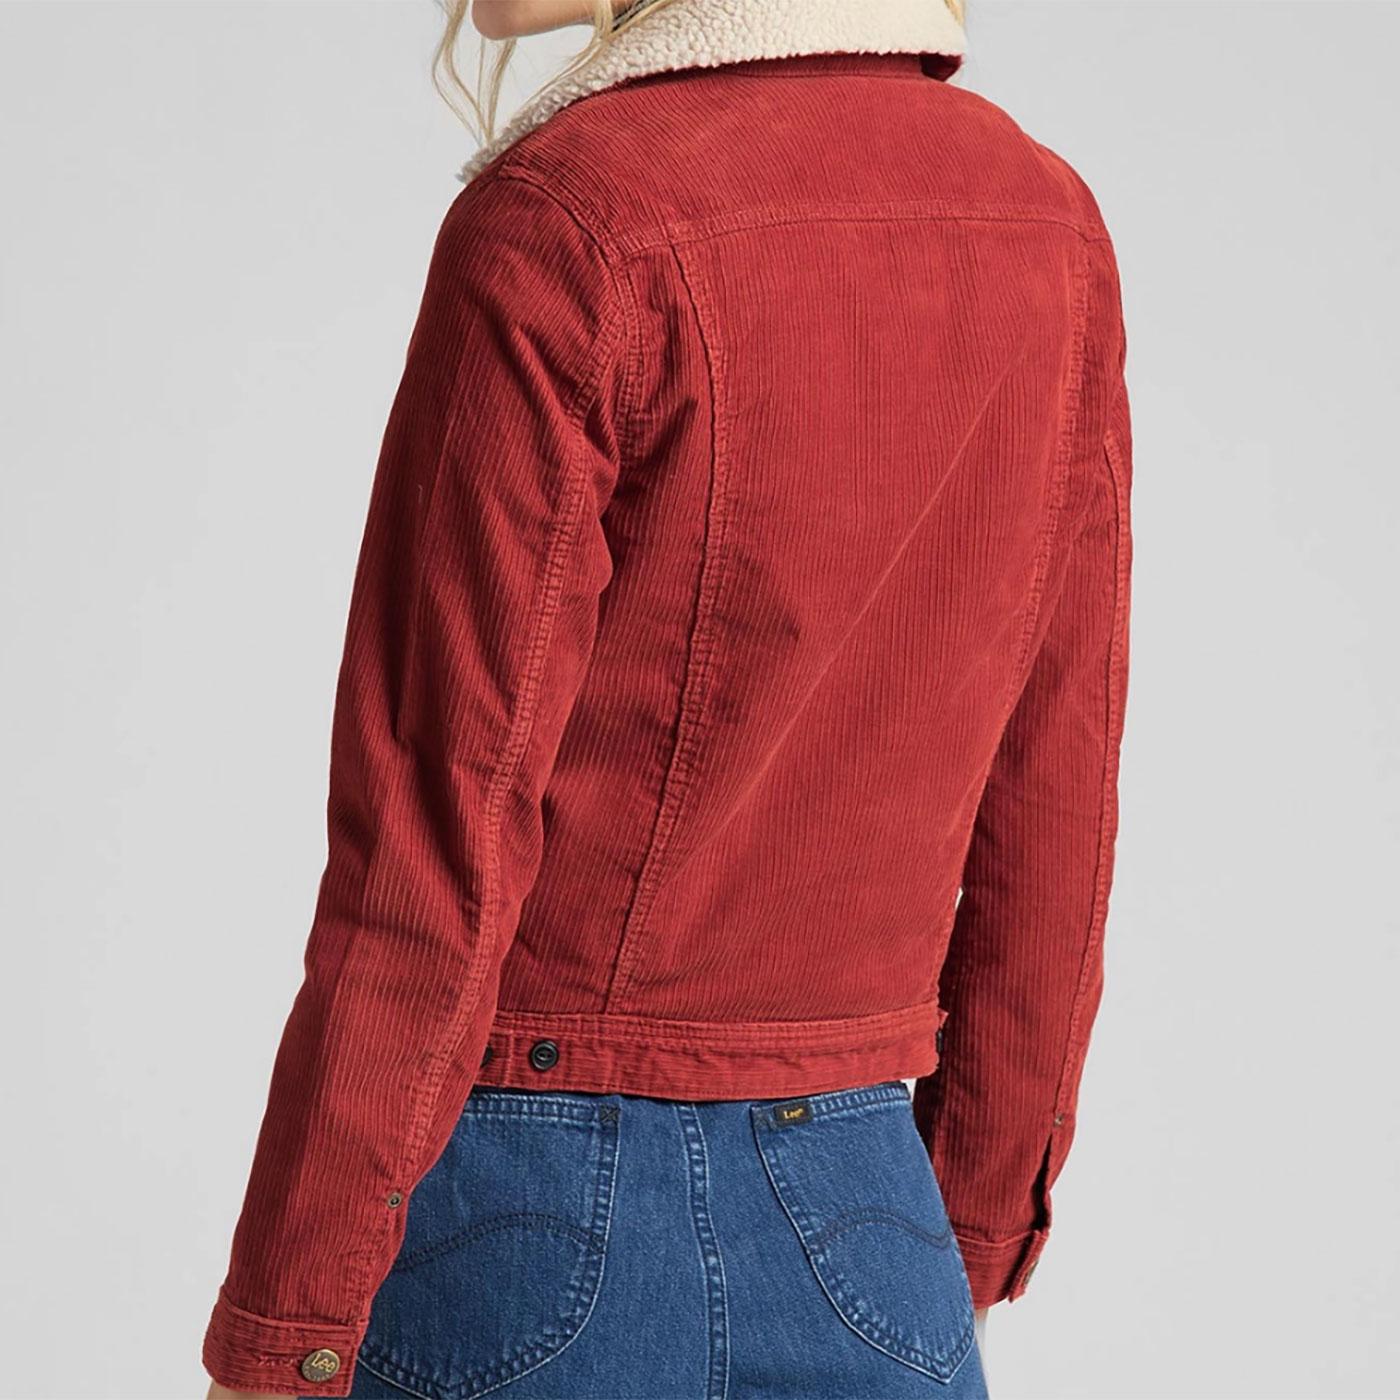 LEE 'Rider' Womens Retro Sherpa Lined Cord Jacket in Red Ocre